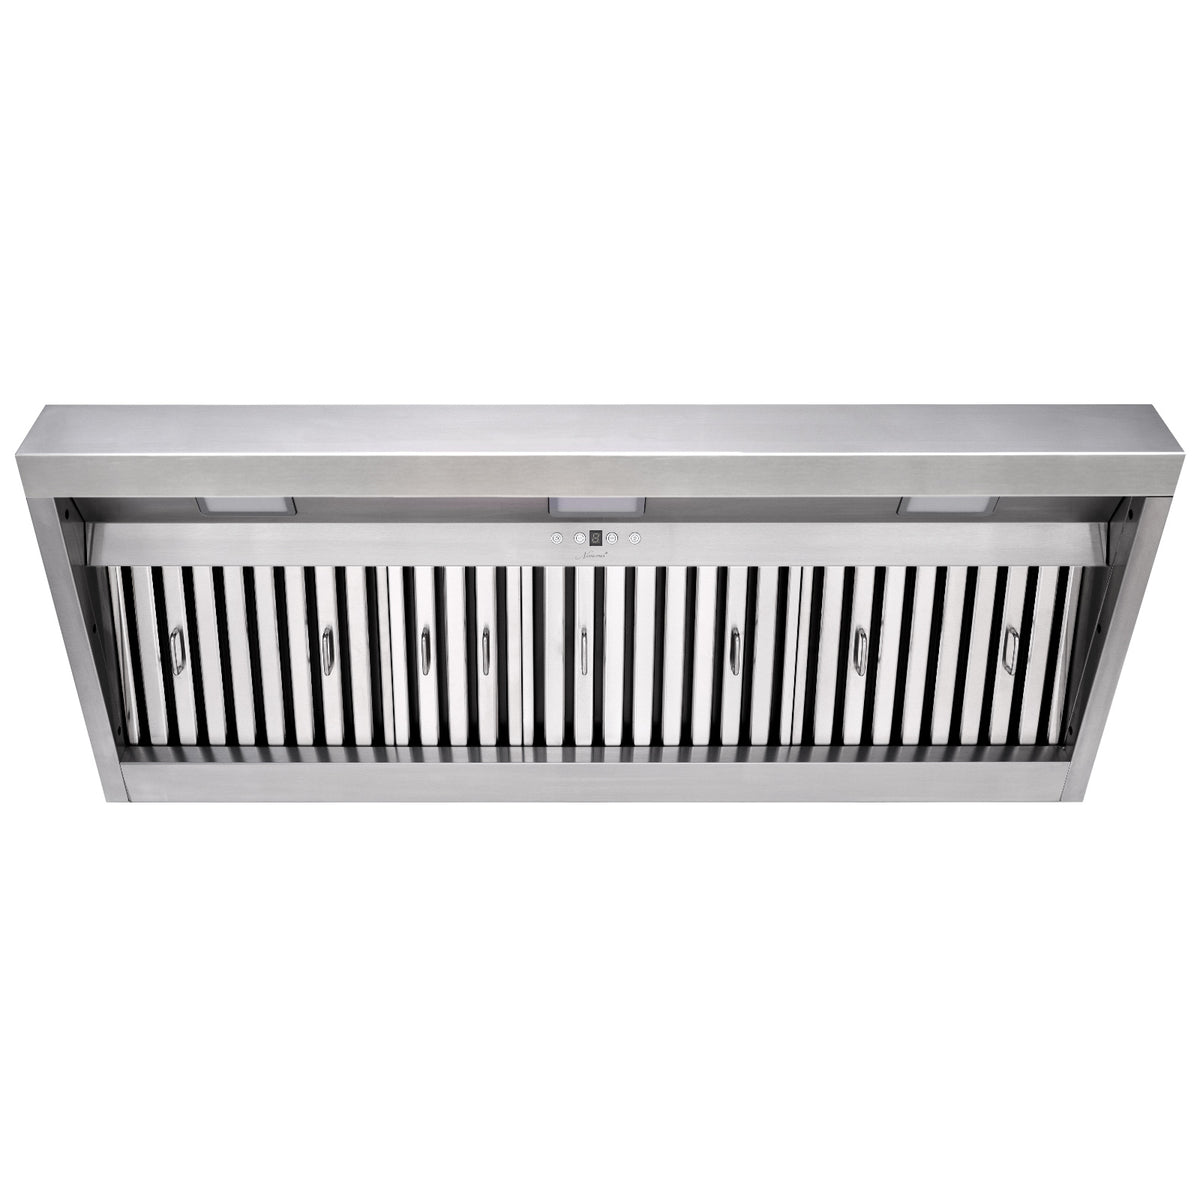 48 Inch Insert/Built-in Range Hood, Ultra Quiet, Powerful Suction Stainless Steel 8'' Duct Kitchen Vent Hood with Dimmable LED Light, 4-Speeds 1200CFM